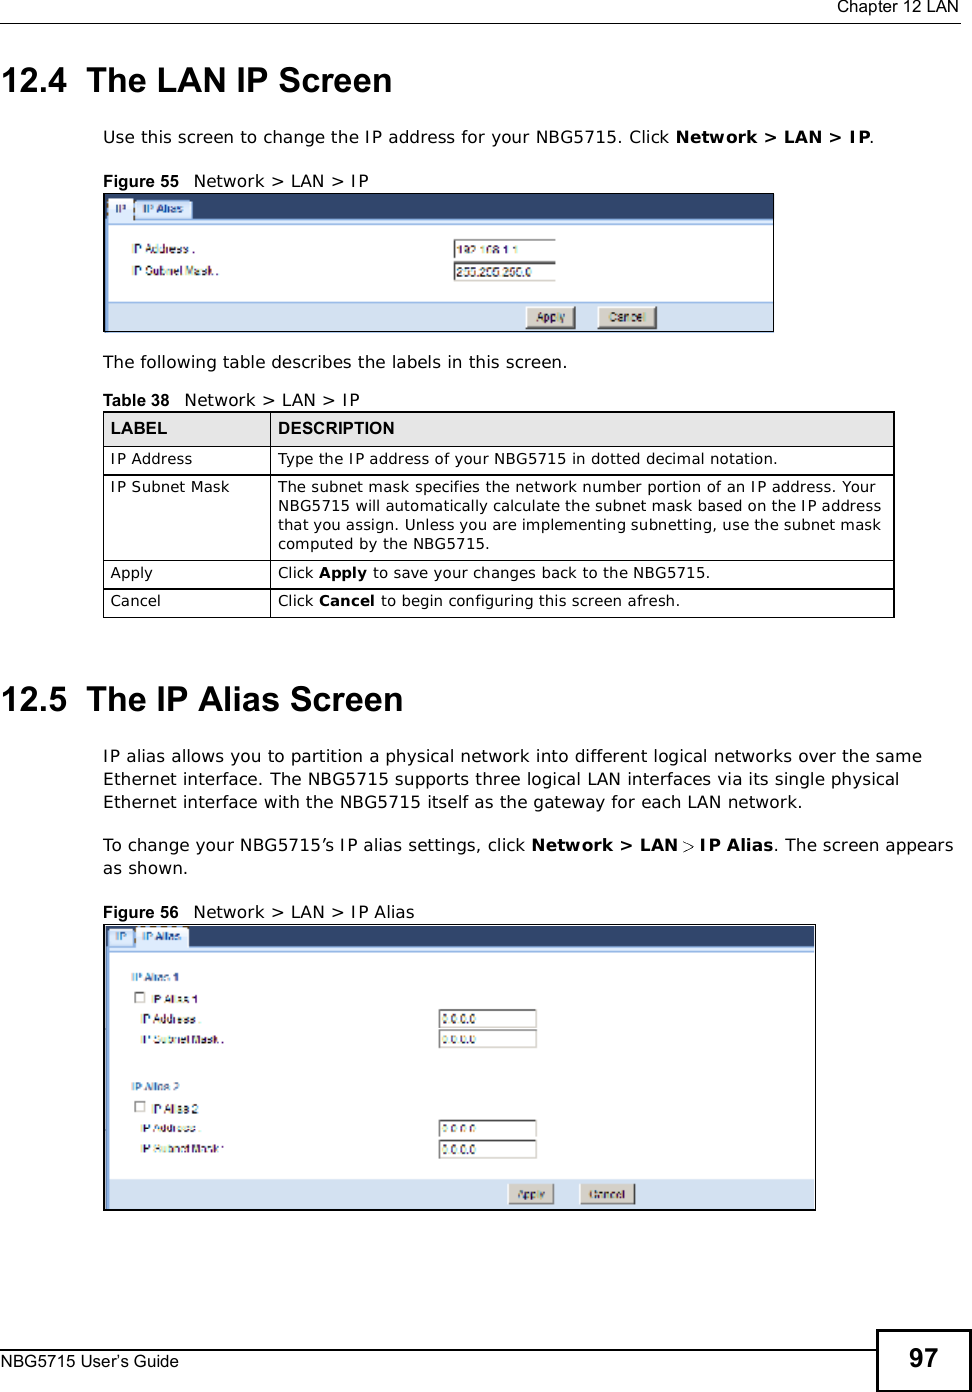  Chapter 12LANNBG5715 User’s Guide 9712.4  The LAN IP ScreenUse this screen to change the IP address for your NBG5715. Click Network &gt; LAN &gt; IP.Figure 55   Network &gt; LAN &gt; IP The following table describes the labels in this screen.12.5  The IP Alias ScreenIP alias allows you to partition a physical network into different logical networks over the same Ethernet interface. The NBG5715 supports three logical LAN interfaces via its single physical Ethernet interface with the NBG5715 itself as the gateway for each LAN network. To change your NBG5715’s IP alias settings, click Network &gt; LAN  IP Alias. The screen appears as shown.Figure 56   Network &gt; LAN &gt; IP Alias Table 38   Network &gt; LAN &gt; IPLABEL DESCRIPTIONIP Address Type the IP address of your NBG5715 in dotted decimal notation.IP Subnet Mask The subnet mask specifies the network number portion of an IP address. Your NBG5715 will automatically calculate the subnet mask based on the IP address that you assign. Unless you are implementing subnetting, use the subnet mask computed by the NBG5715.Apply Click Apply to save your changes back to the NBG5715.Cancel Click Cancel to begin configuring this screen afresh.